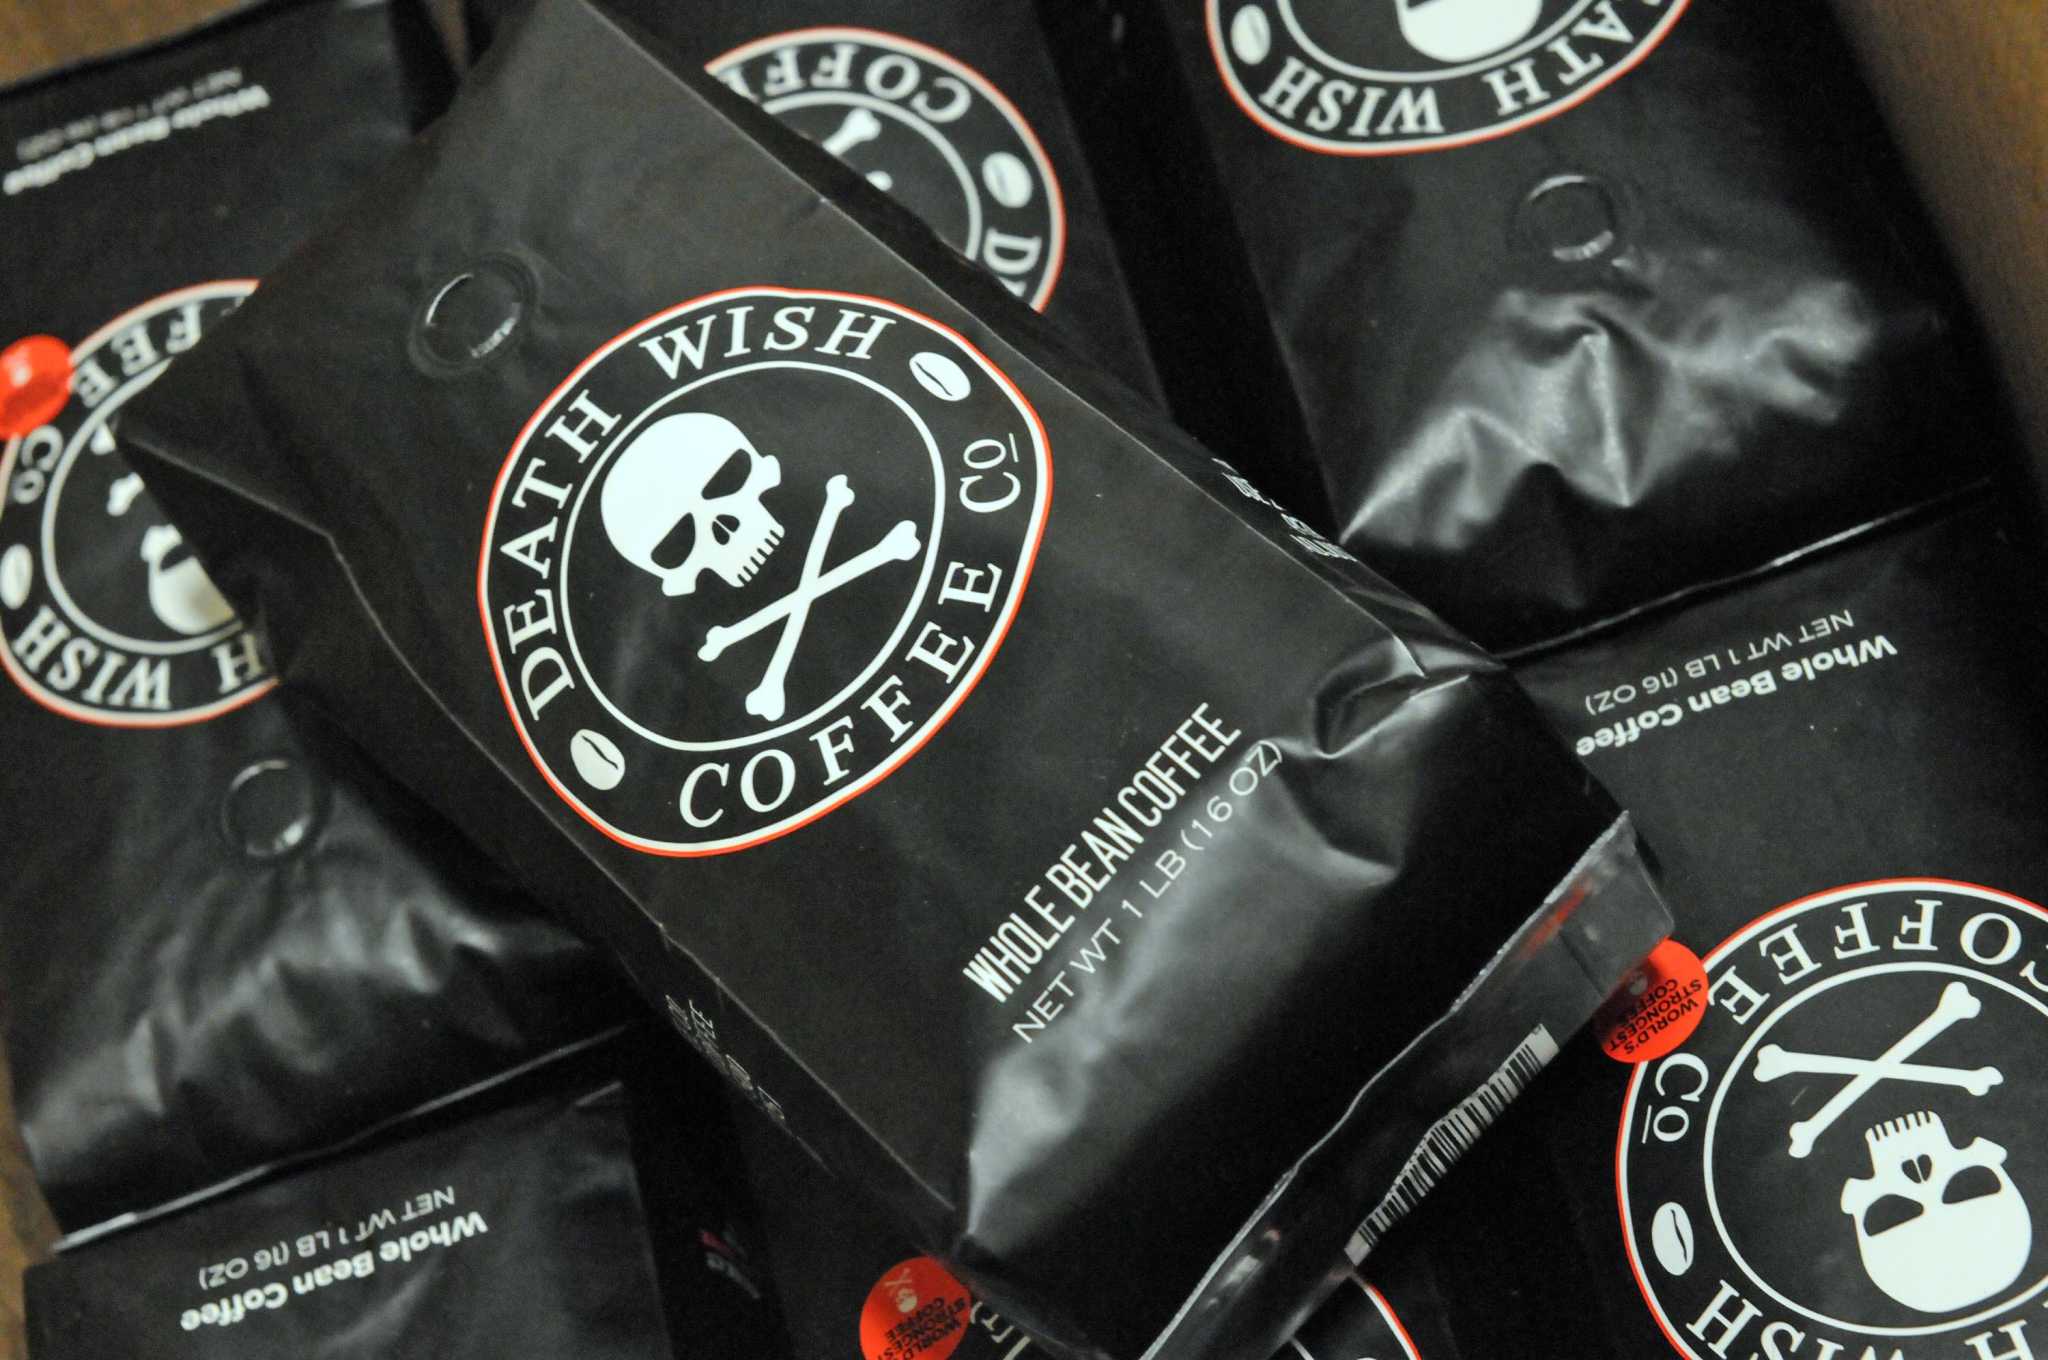 friday 13 tattoo - DEATH WISH COFFEE CO. LAUNCHES COFFEE NOTES WITH BAND HALESTORM